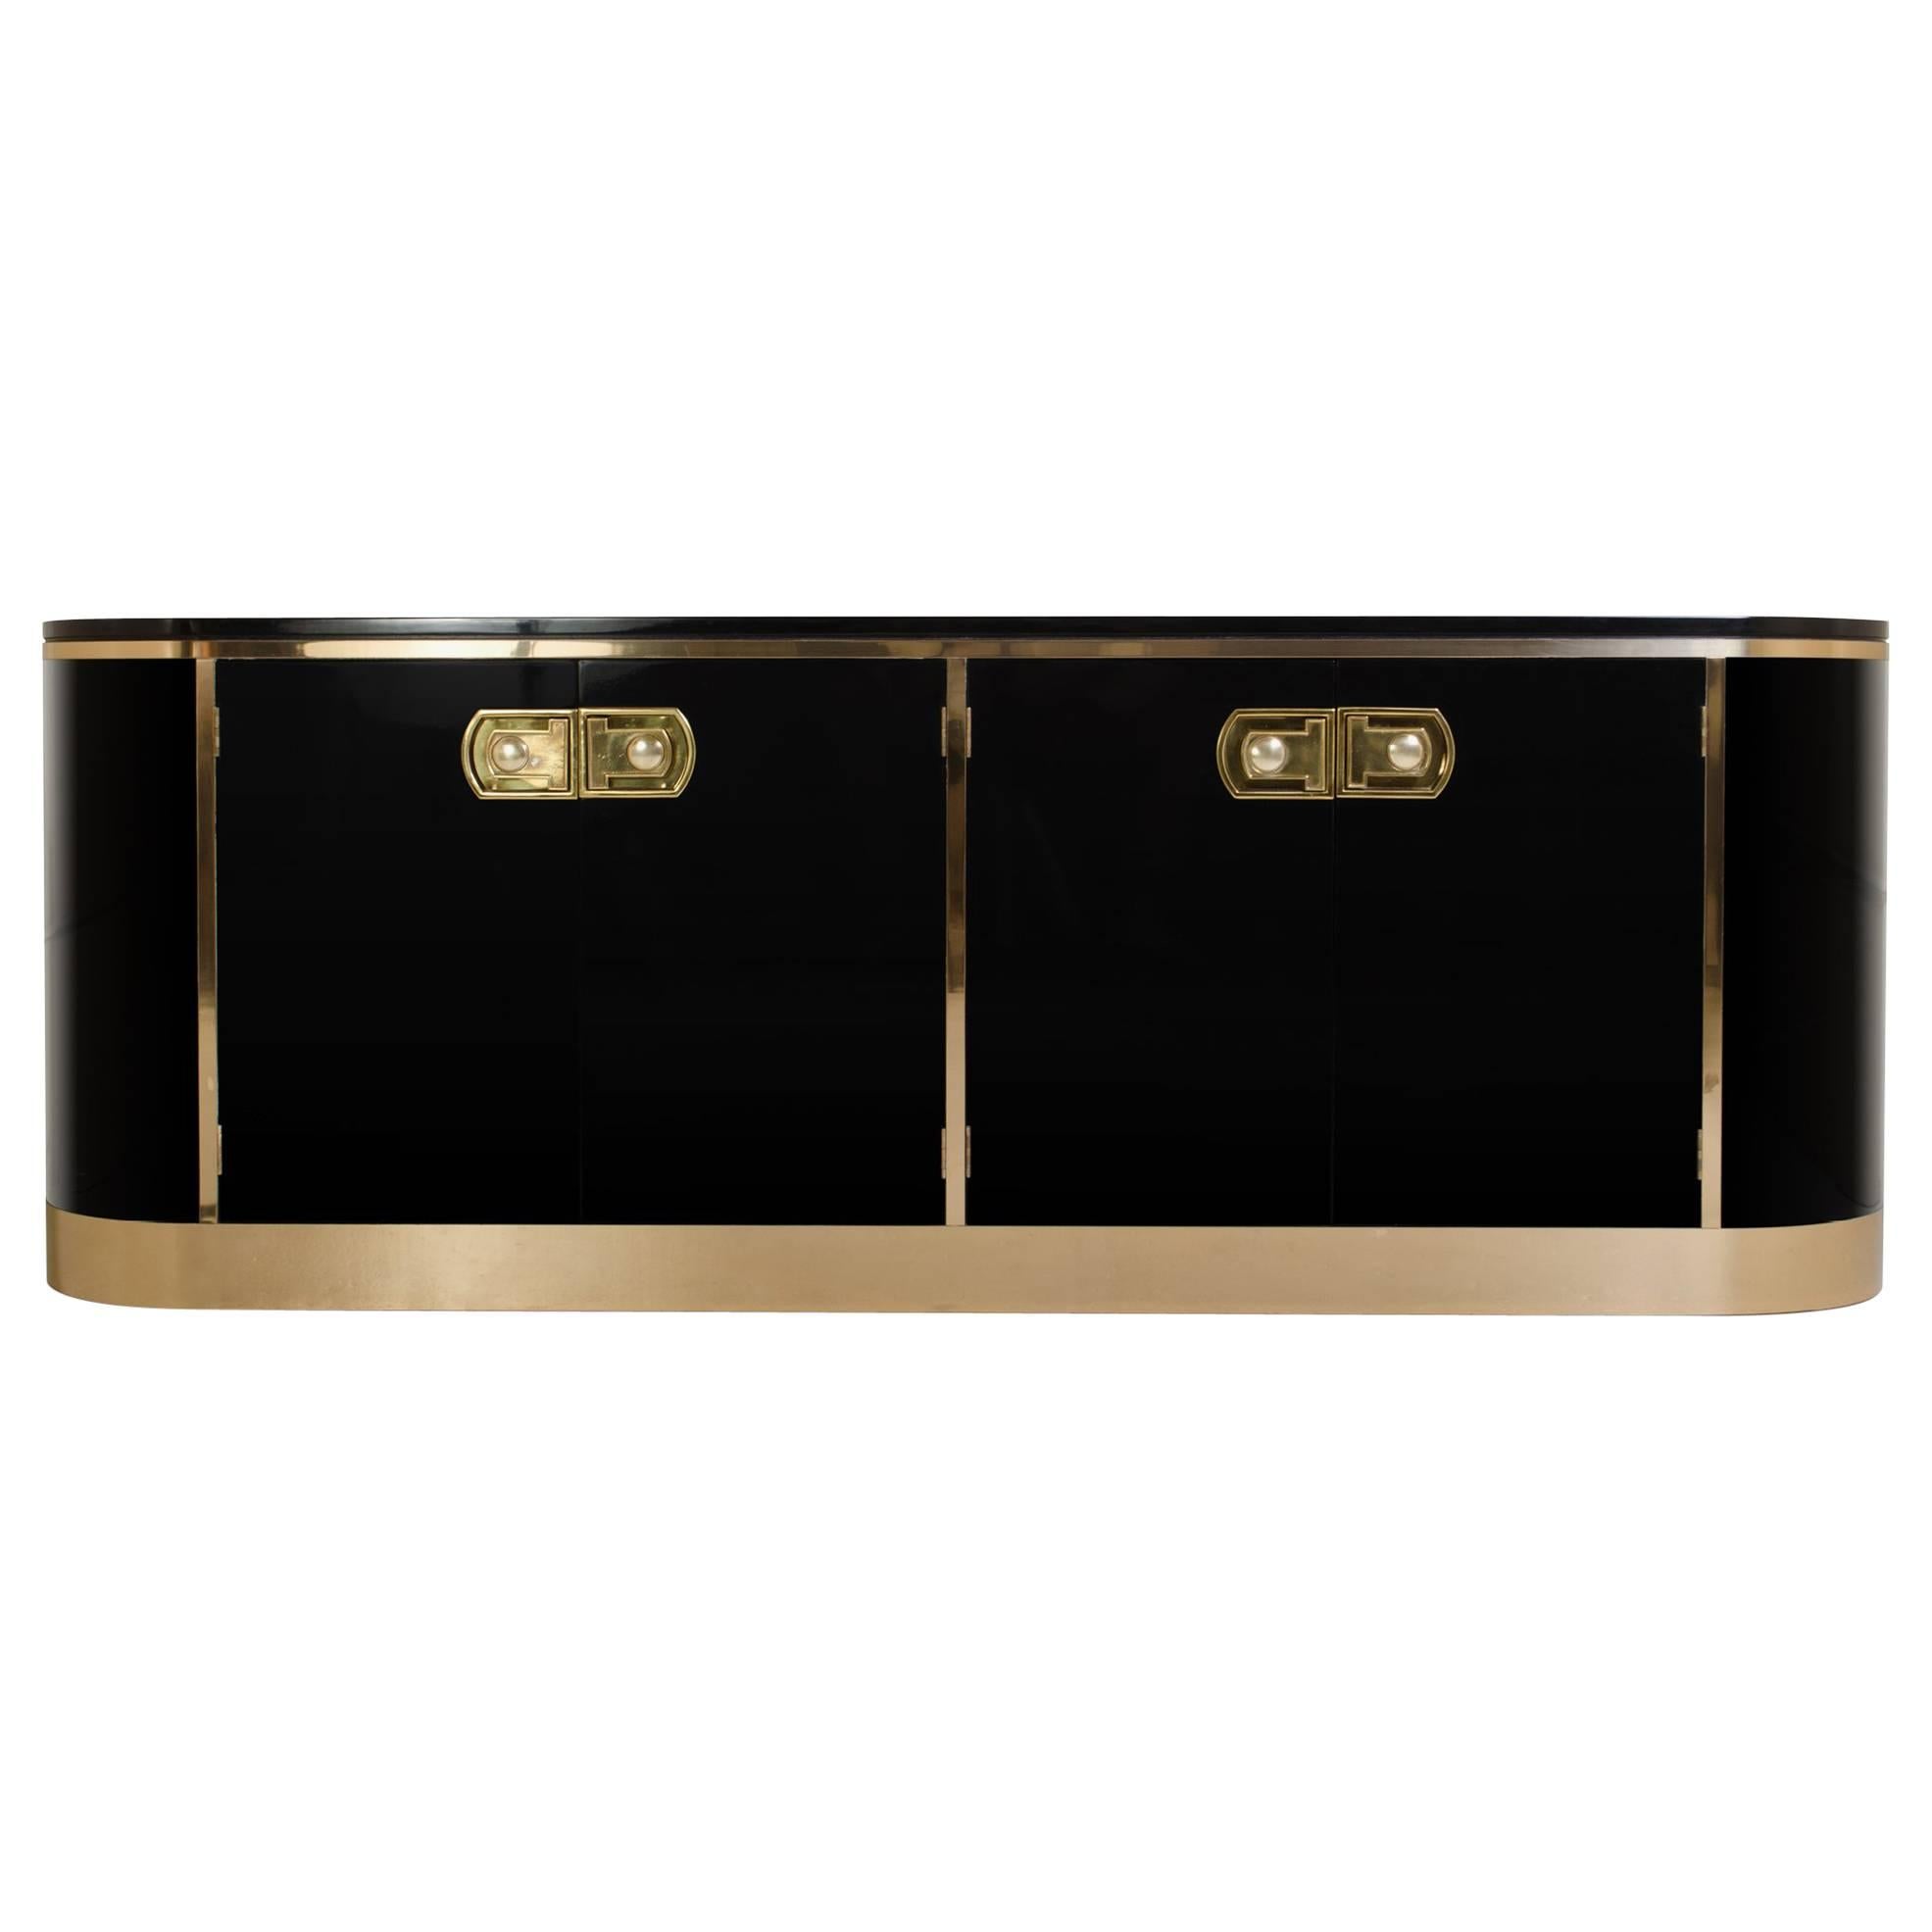 Ebony Lacquer and Polished Brass Credenza by Mastercraft